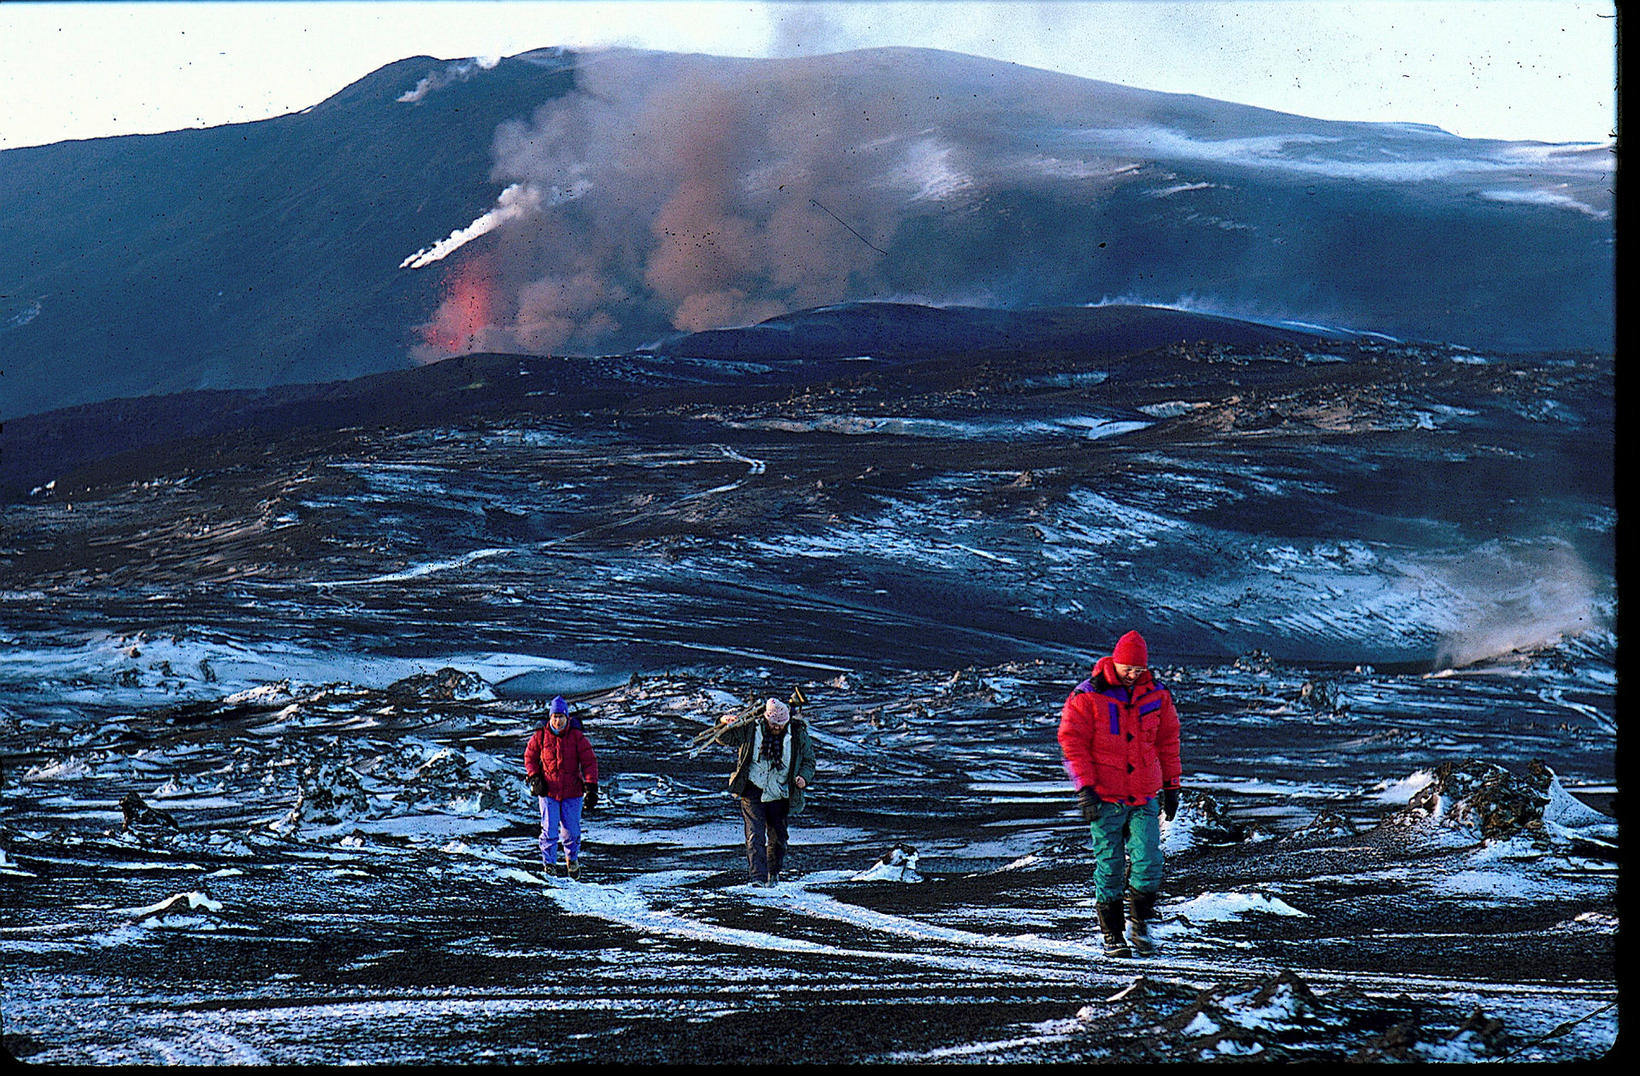 From the 1991 Hekla eruption, when lava covered an area …